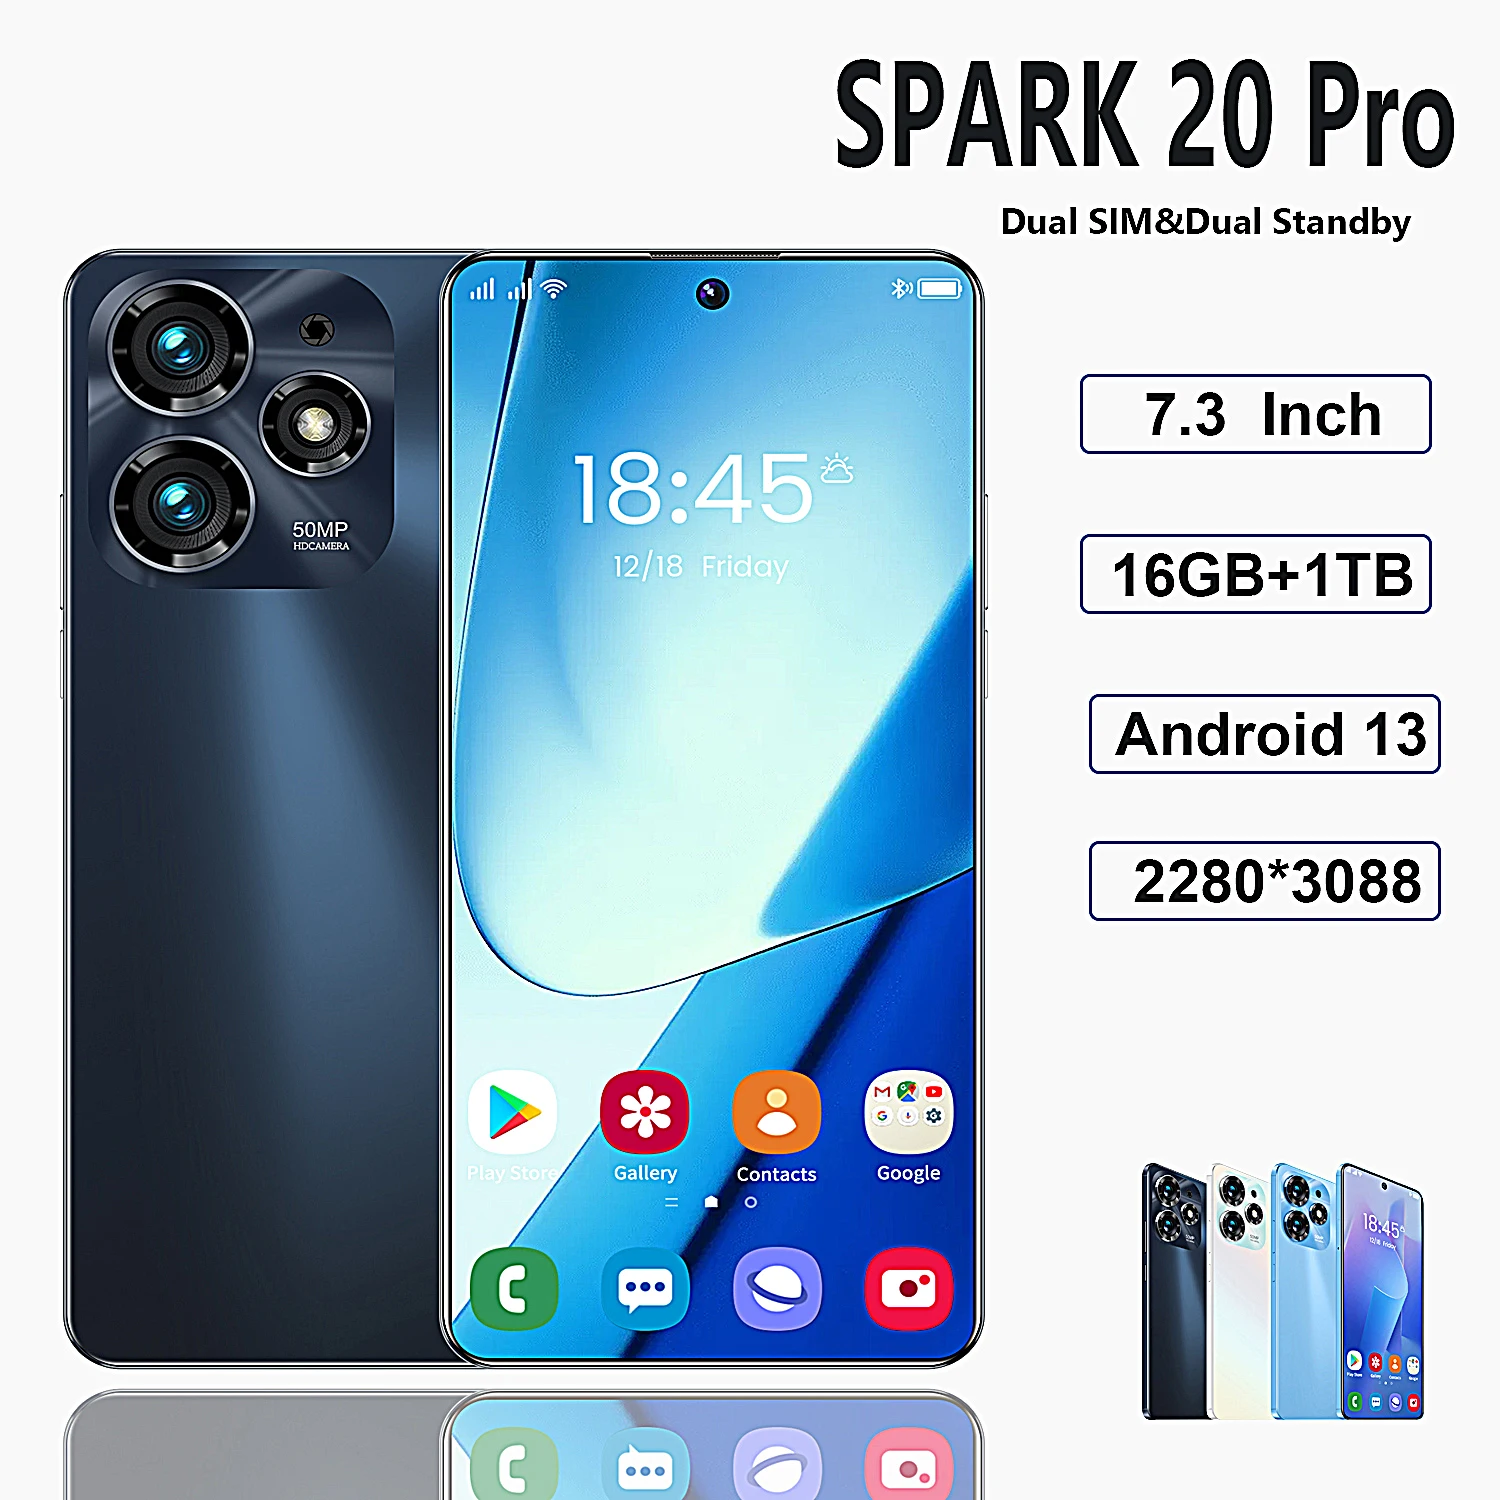 SPARK 20 Pro Smartphone 5G Qualcomm8 Gen 2  10 cores 7.3-inch HD 2280*3088 16GB+1TB 32+50MP 8000mAh  Android 13 GPS Mobile phone